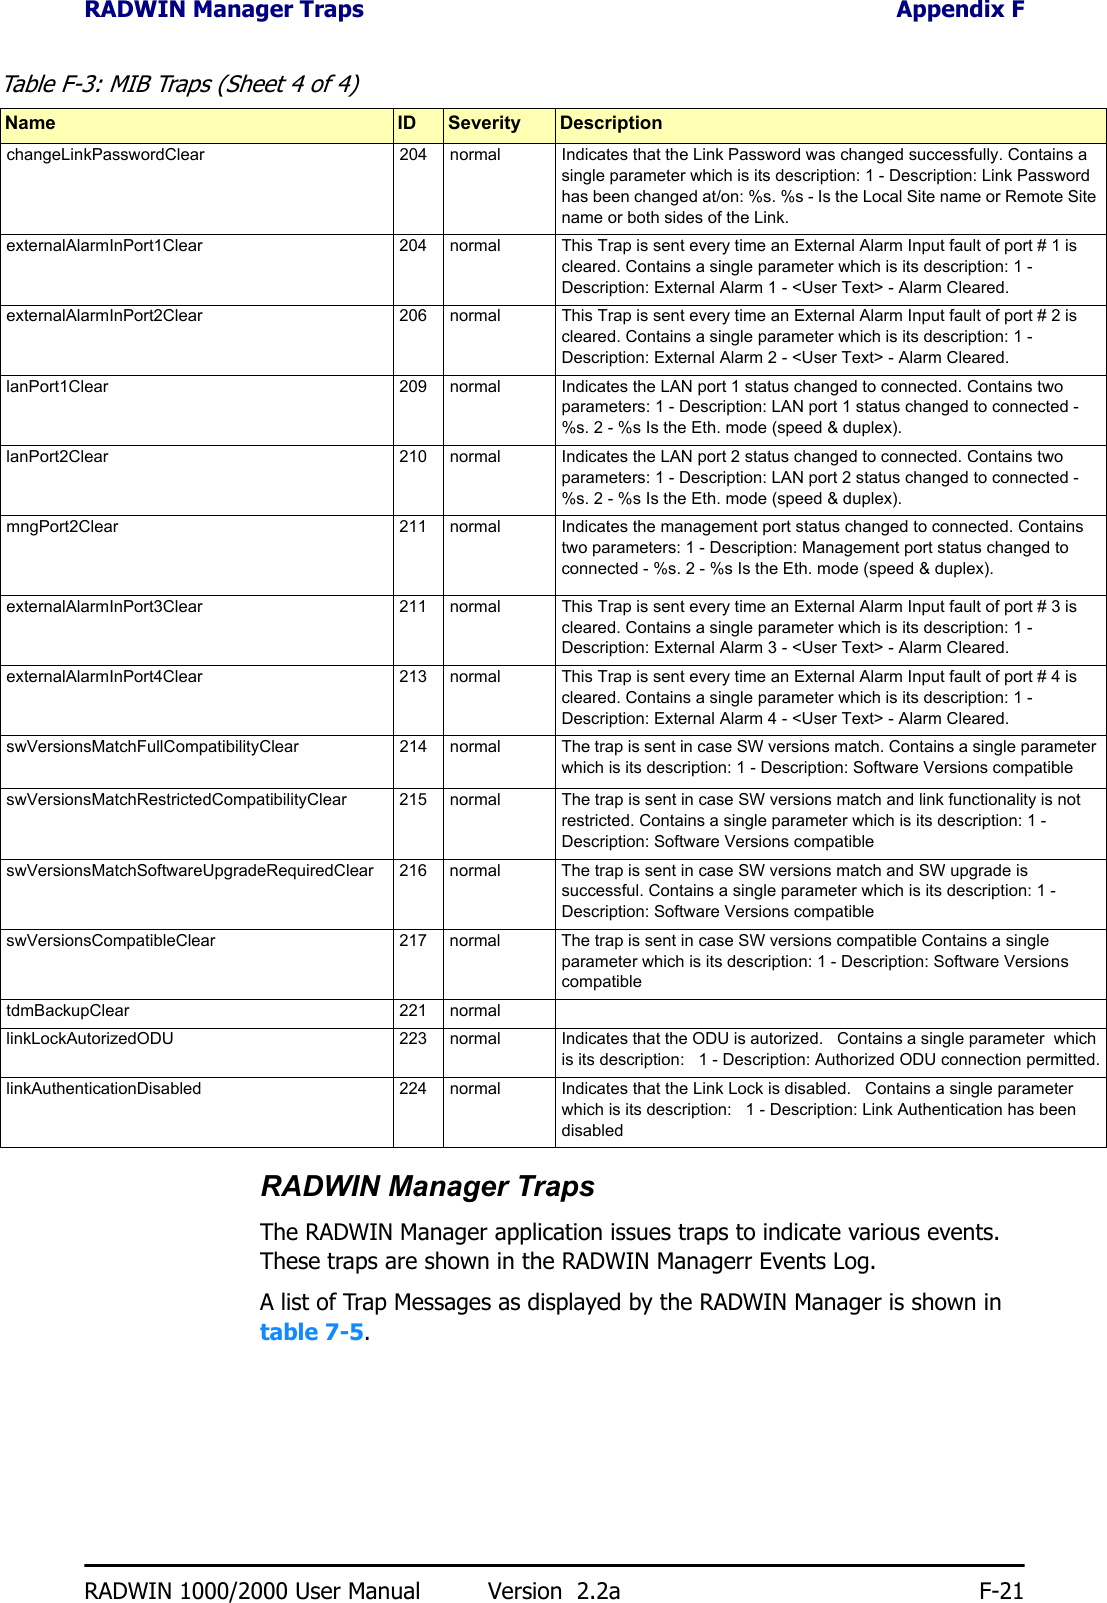 RADWIN Manager Traps Appendix FRADWIN 1000/2000 User Manual Version  2.2a F-21RADWIN Manager TrapsThe RADWIN Manager application issues traps to indicate various events. These traps are shown in the RADWIN Managerr Events Log.A list of Trap Messages as displayed by the RADWIN Manager is shown in table 7-5.changeLinkPasswordClear 204 normal Indicates that the Link Password was changed successfully. Contains a single parameter which is its description: 1 - Description: Link Password has been changed at/on: %s. %s - Is the Local Site name or Remote Site name or both sides of the Link. externalAlarmInPort1Clear 204 normal This Trap is sent every time an External Alarm Input fault of port # 1 is cleared. Contains a single parameter which is its description: 1 - Description: External Alarm 1 - &lt;User Text&gt; - Alarm Cleared. externalAlarmInPort2Clear 206 normal This Trap is sent every time an External Alarm Input fault of port # 2 is cleared. Contains a single parameter which is its description: 1 - Description: External Alarm 2 - &lt;User Text&gt; - Alarm Cleared. lanPort1Clear 209 normal Indicates the LAN port 1 status changed to connected. Contains two parameters: 1 - Description: LAN port 1 status changed to connected - %s. 2 - %s Is the Eth. mode (speed &amp; duplex). lanPort2Clear 210 normal Indicates the LAN port 2 status changed to connected. Contains two parameters: 1 - Description: LAN port 2 status changed to connected - %s. 2 - %s Is the Eth. mode (speed &amp; duplex). mngPort2Clear 211 normal Indicates the management port status changed to connected. Contains two parameters: 1 - Description: Management port status changed to connected - %s. 2 - %s Is the Eth. mode (speed &amp; duplex). externalAlarmInPort3Clear 211 normal This Trap is sent every time an External Alarm Input fault of port # 3 is cleared. Contains a single parameter which is its description: 1 - Description: External Alarm 3 - &lt;User Text&gt; - Alarm Cleared. externalAlarmInPort4Clear 213 normal This Trap is sent every time an External Alarm Input fault of port # 4 is cleared. Contains a single parameter which is its description: 1 - Description: External Alarm 4 - &lt;User Text&gt; - Alarm Cleared. swVersionsMatchFullCompatibilityClear 214 normal The trap is sent in case SW versions match. Contains a single parameter which is its description: 1 - Description: Software Versions compatible swVersionsMatchRestrictedCompatibilityClear 215 normal The trap is sent in case SW versions match and link functionality is not restricted. Contains a single parameter which is its description: 1 - Description: Software Versions compatible swVersionsMatchSoftwareUpgradeRequiredClear 216 normal The trap is sent in case SW versions match and SW upgrade is successful. Contains a single parameter which is its description: 1 - Description: Software Versions compatible swVersionsCompatibleClear 217 normal The trap is sent in case SW versions compatible Contains a single parameter which is its description: 1 - Description: Software Versions compatible tdmBackupClear 221 normallinkLockAutorizedODU 223 normal Indicates that the ODU is autorized.  Contains a single parameter  which is its description:  1 - Description: Authorized ODU connection permitted.linkAuthenticationDisabled 224 normal Indicates that the Link Lock is disabled.  Contains a single parameter  which is its description:  1 - Description: Link Authentication has been disabledTable F-3: MIB Traps (Sheet 4 of 4)Name ID Severity Description